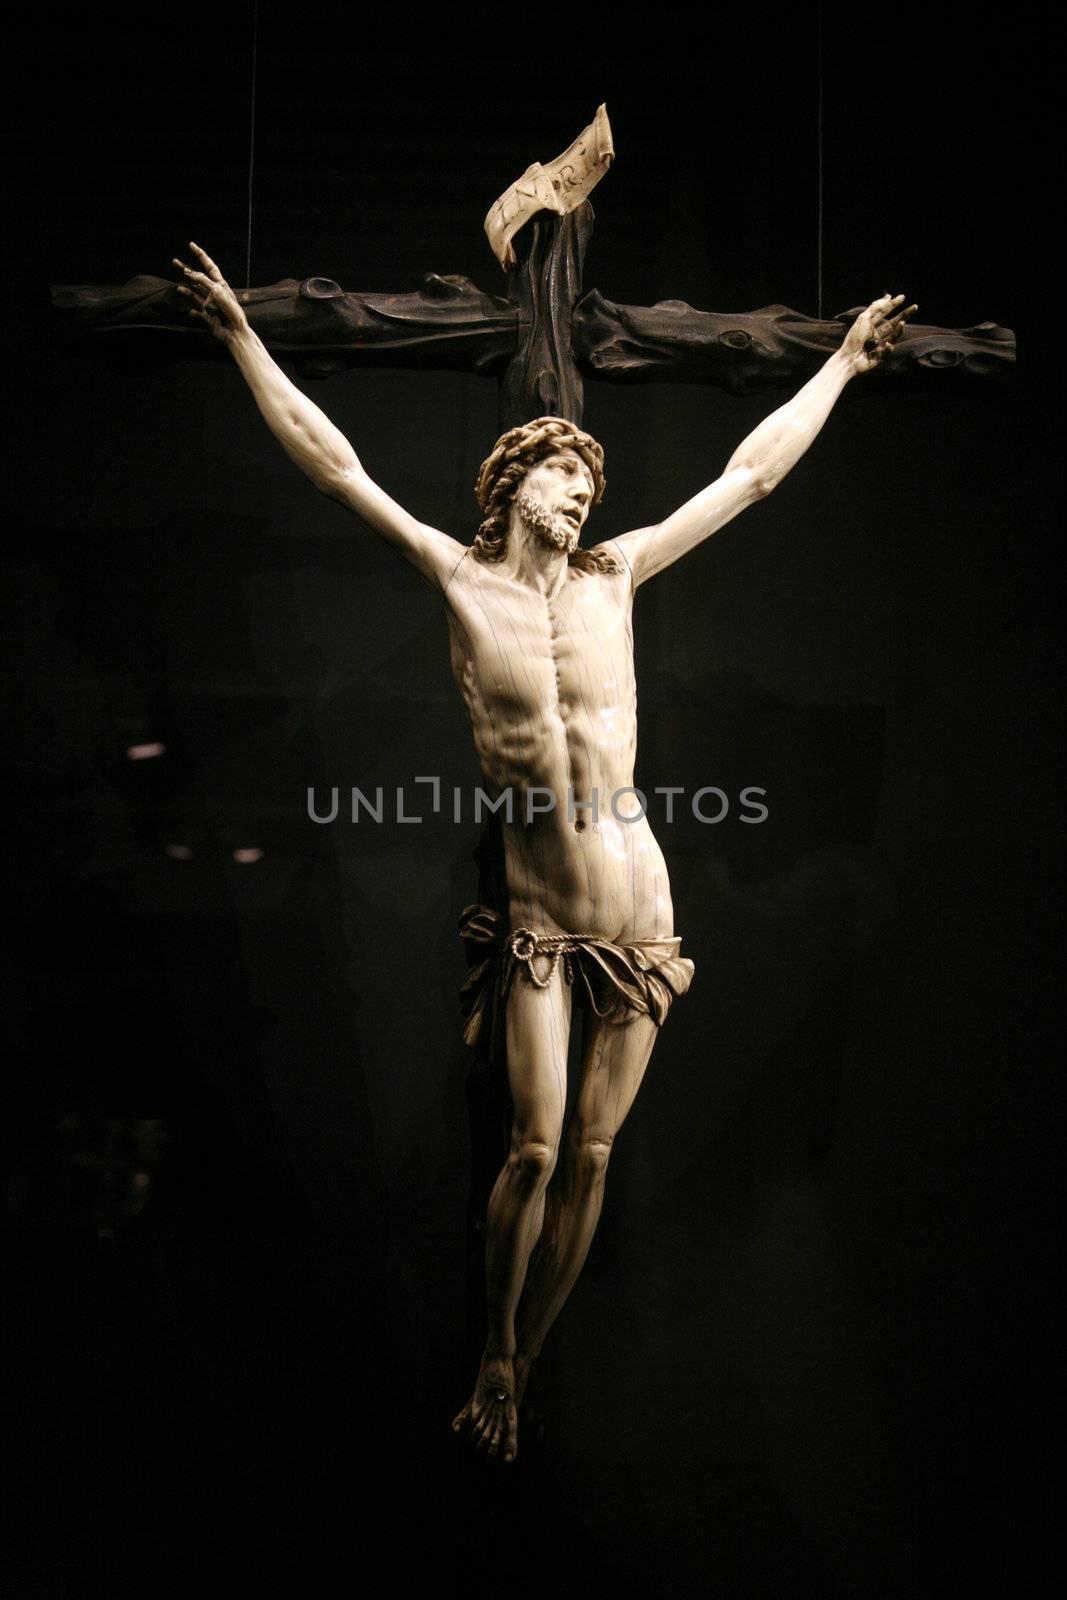 sculpture of jesus christ at the cross